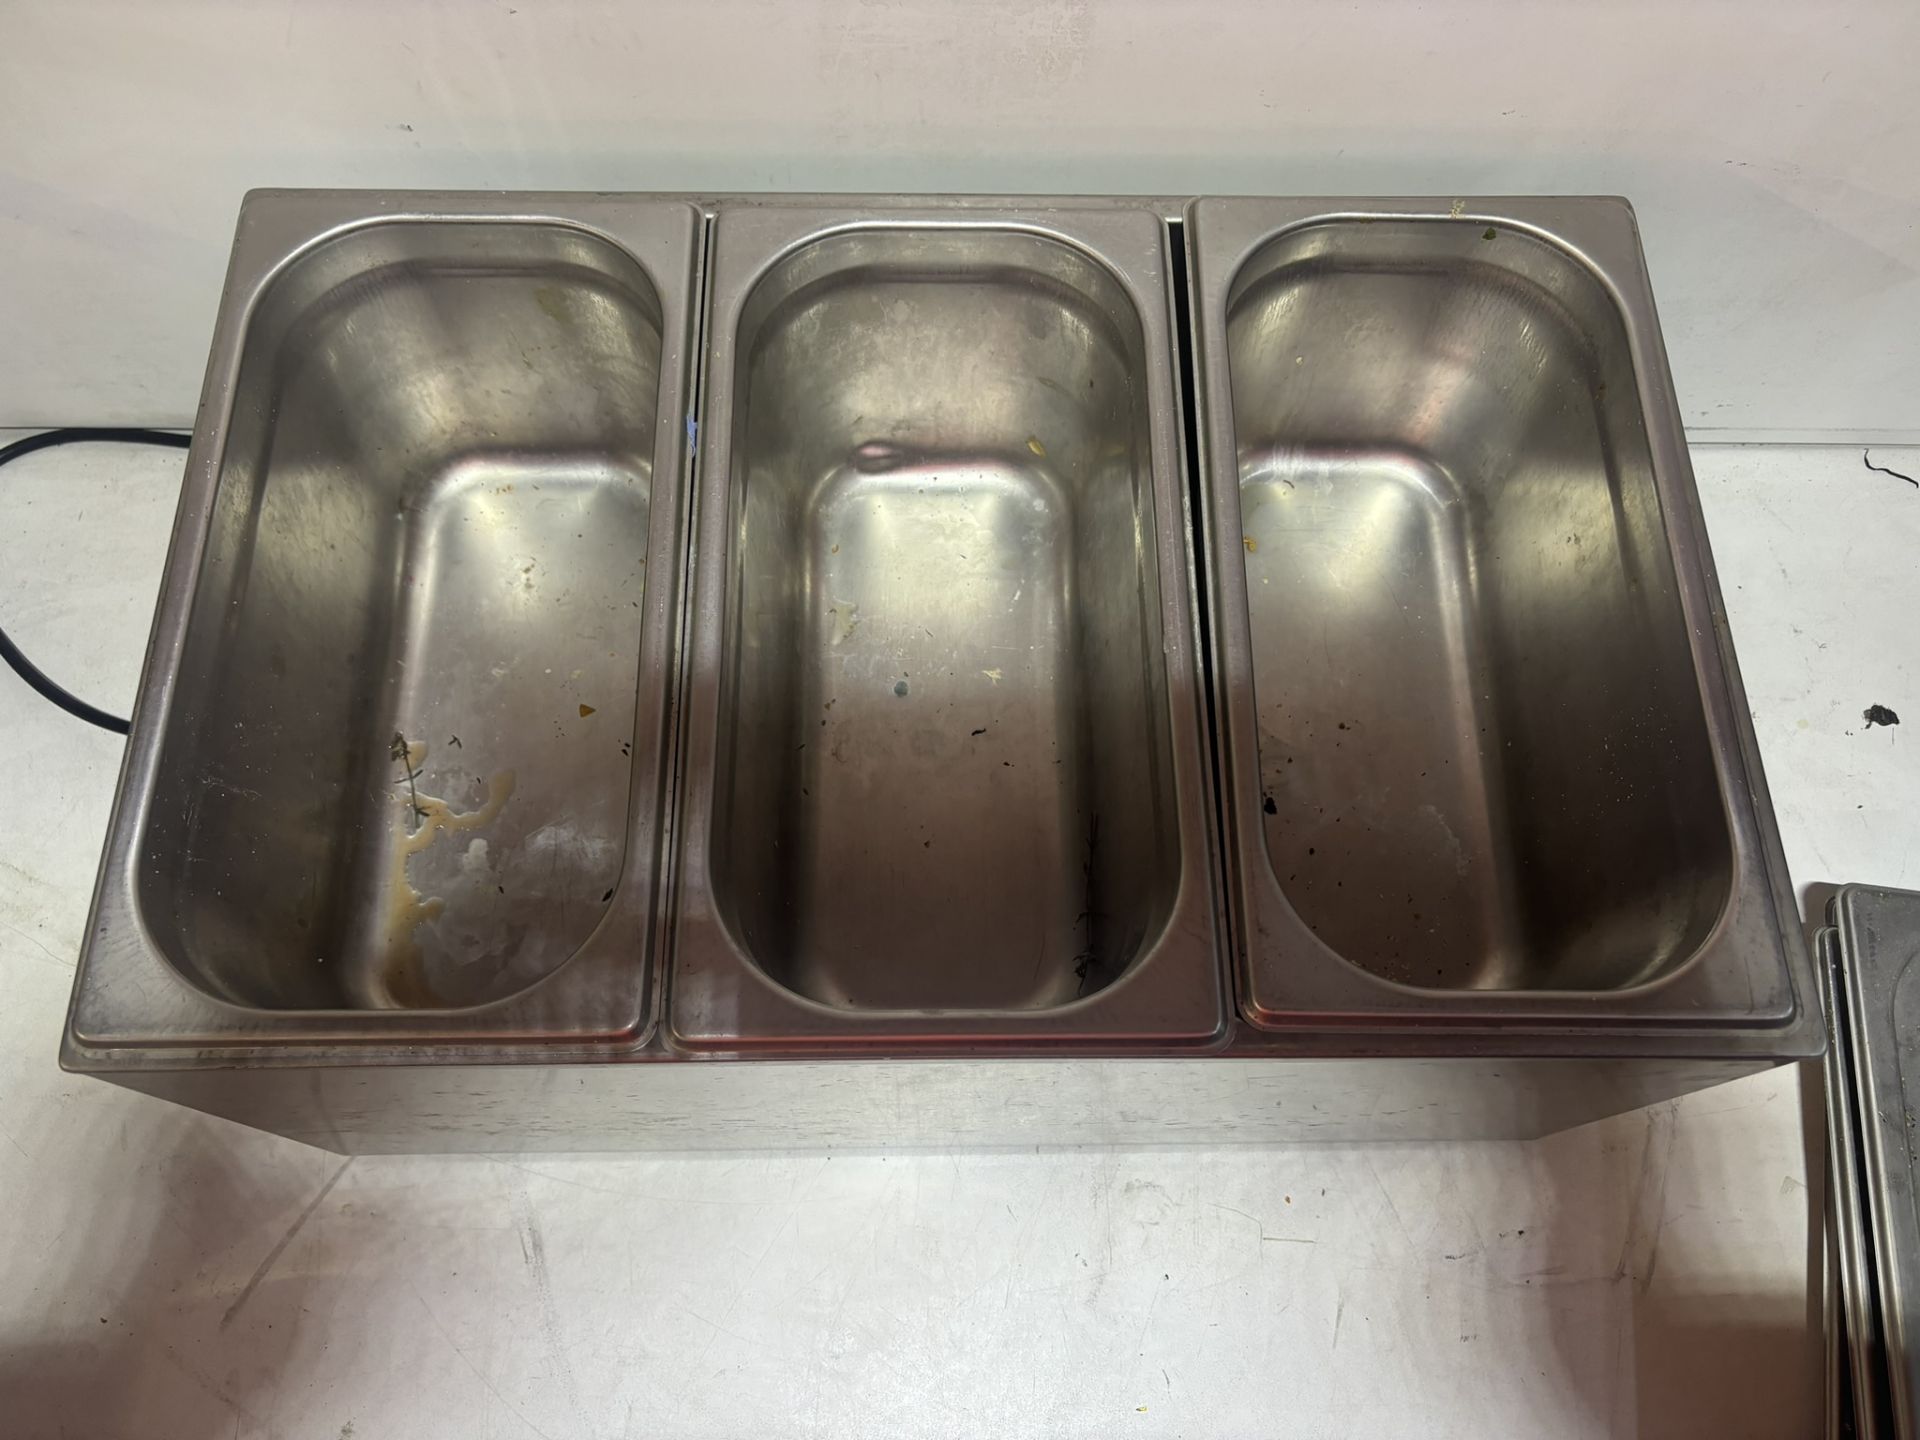 Royal Catering Commercial Bain Marie With 3 Containers & Lids - Image 4 of 7